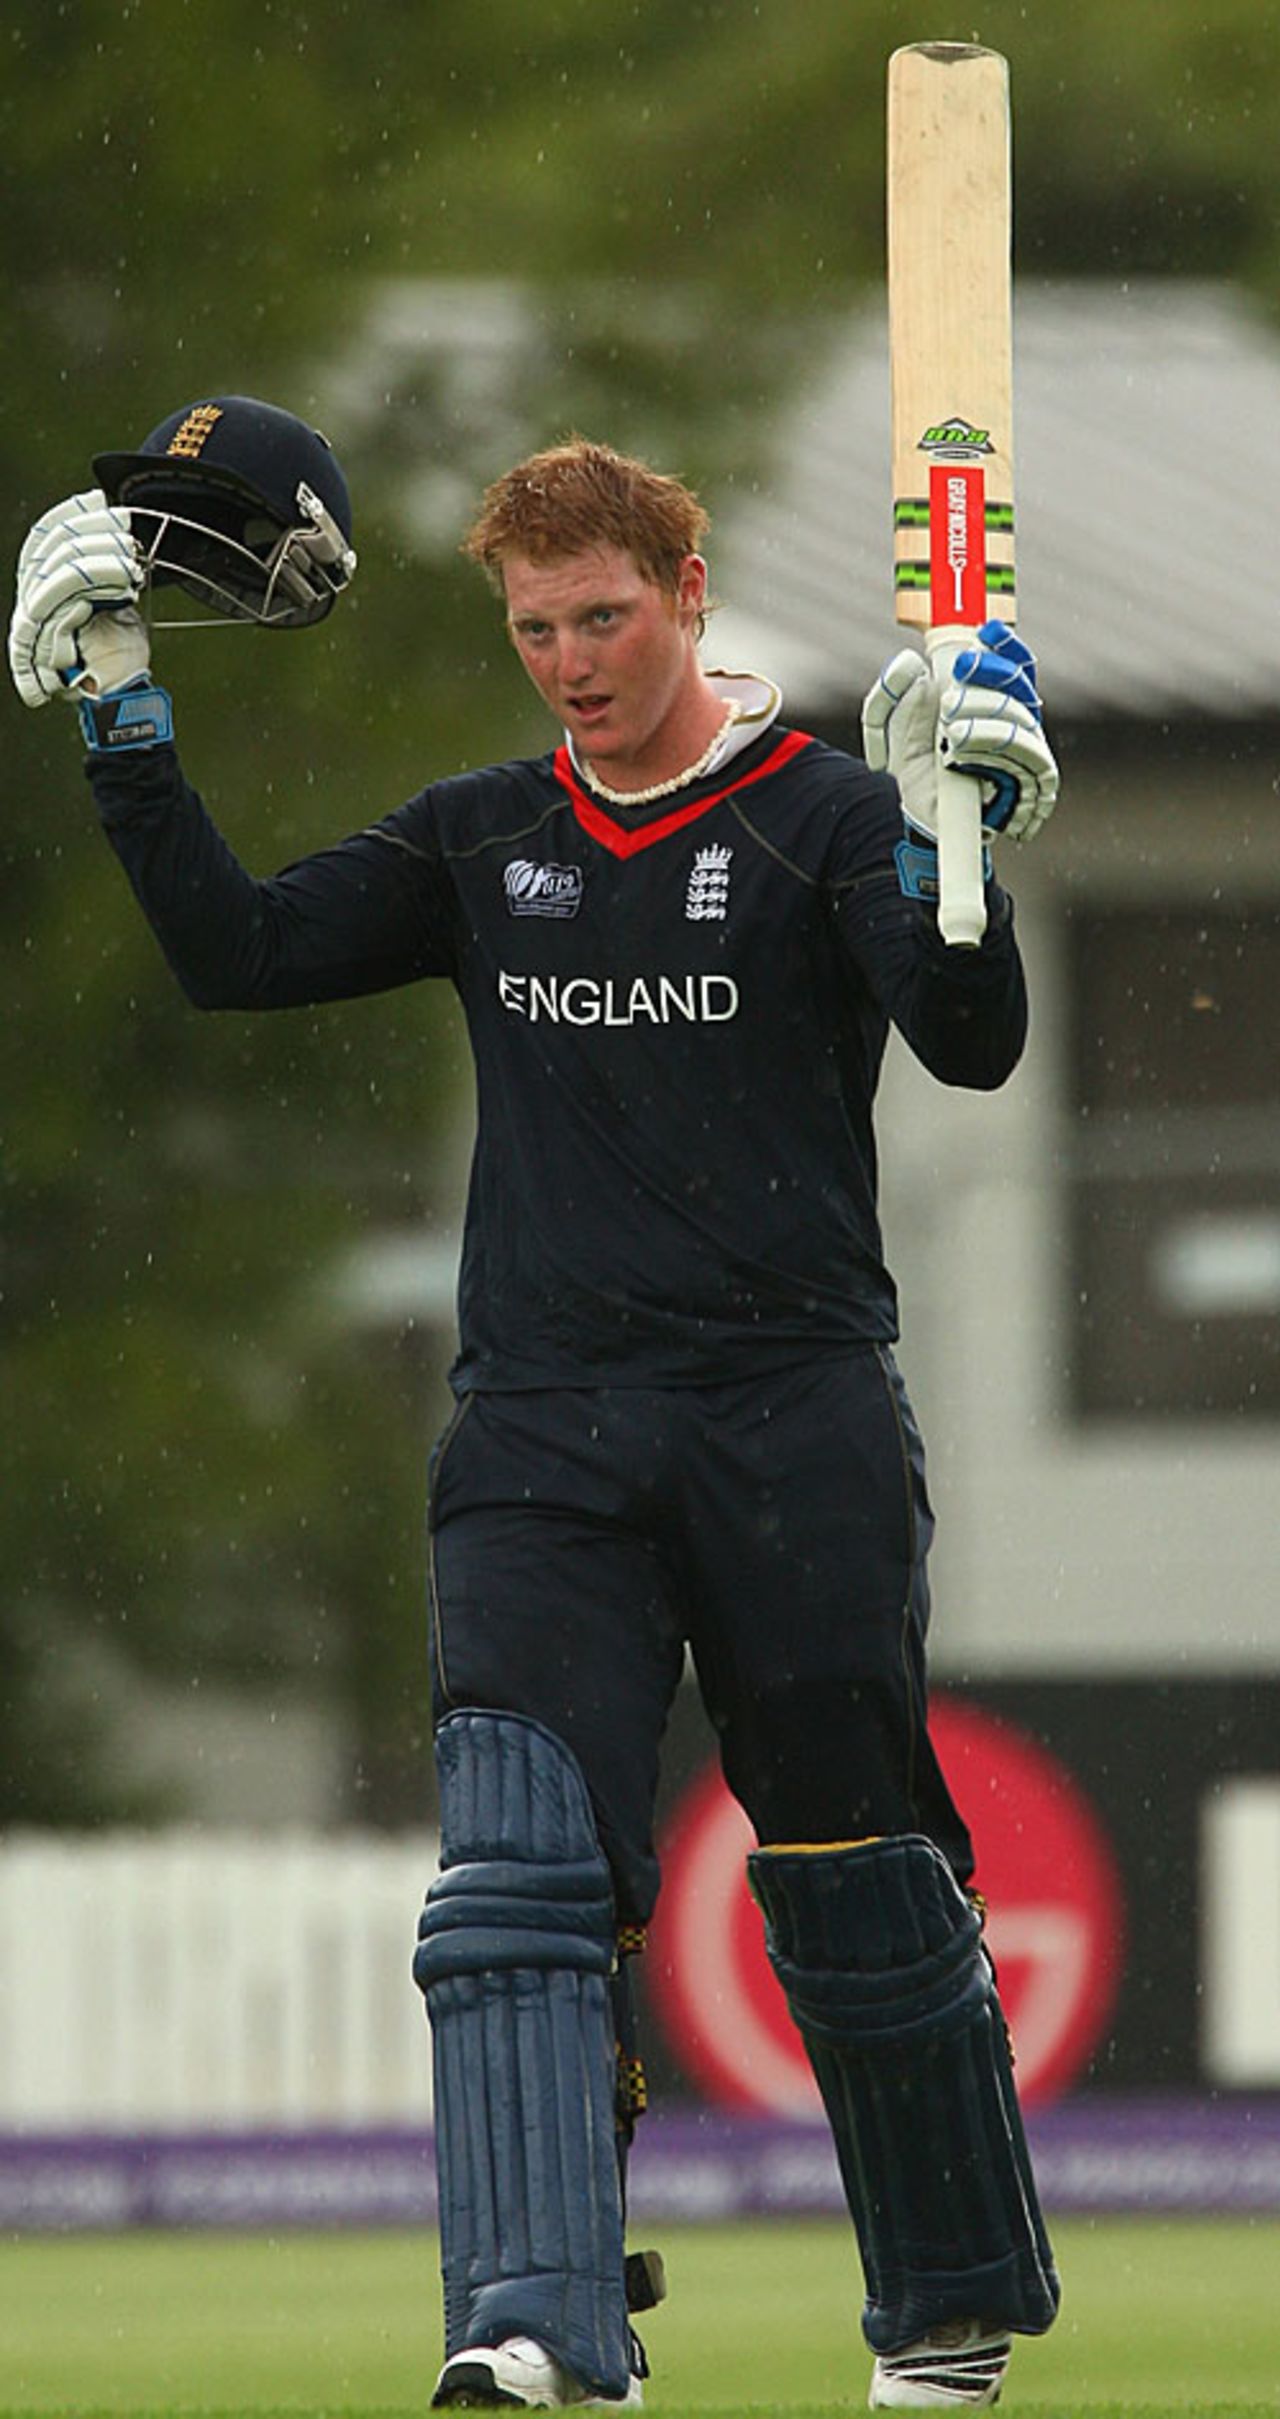 Ben Stokes celebrates his century, England Under-19s v India Under-19s, 24th Match, Group A, ICC Under-19 World Cup, Lincoln, January 21, 2010